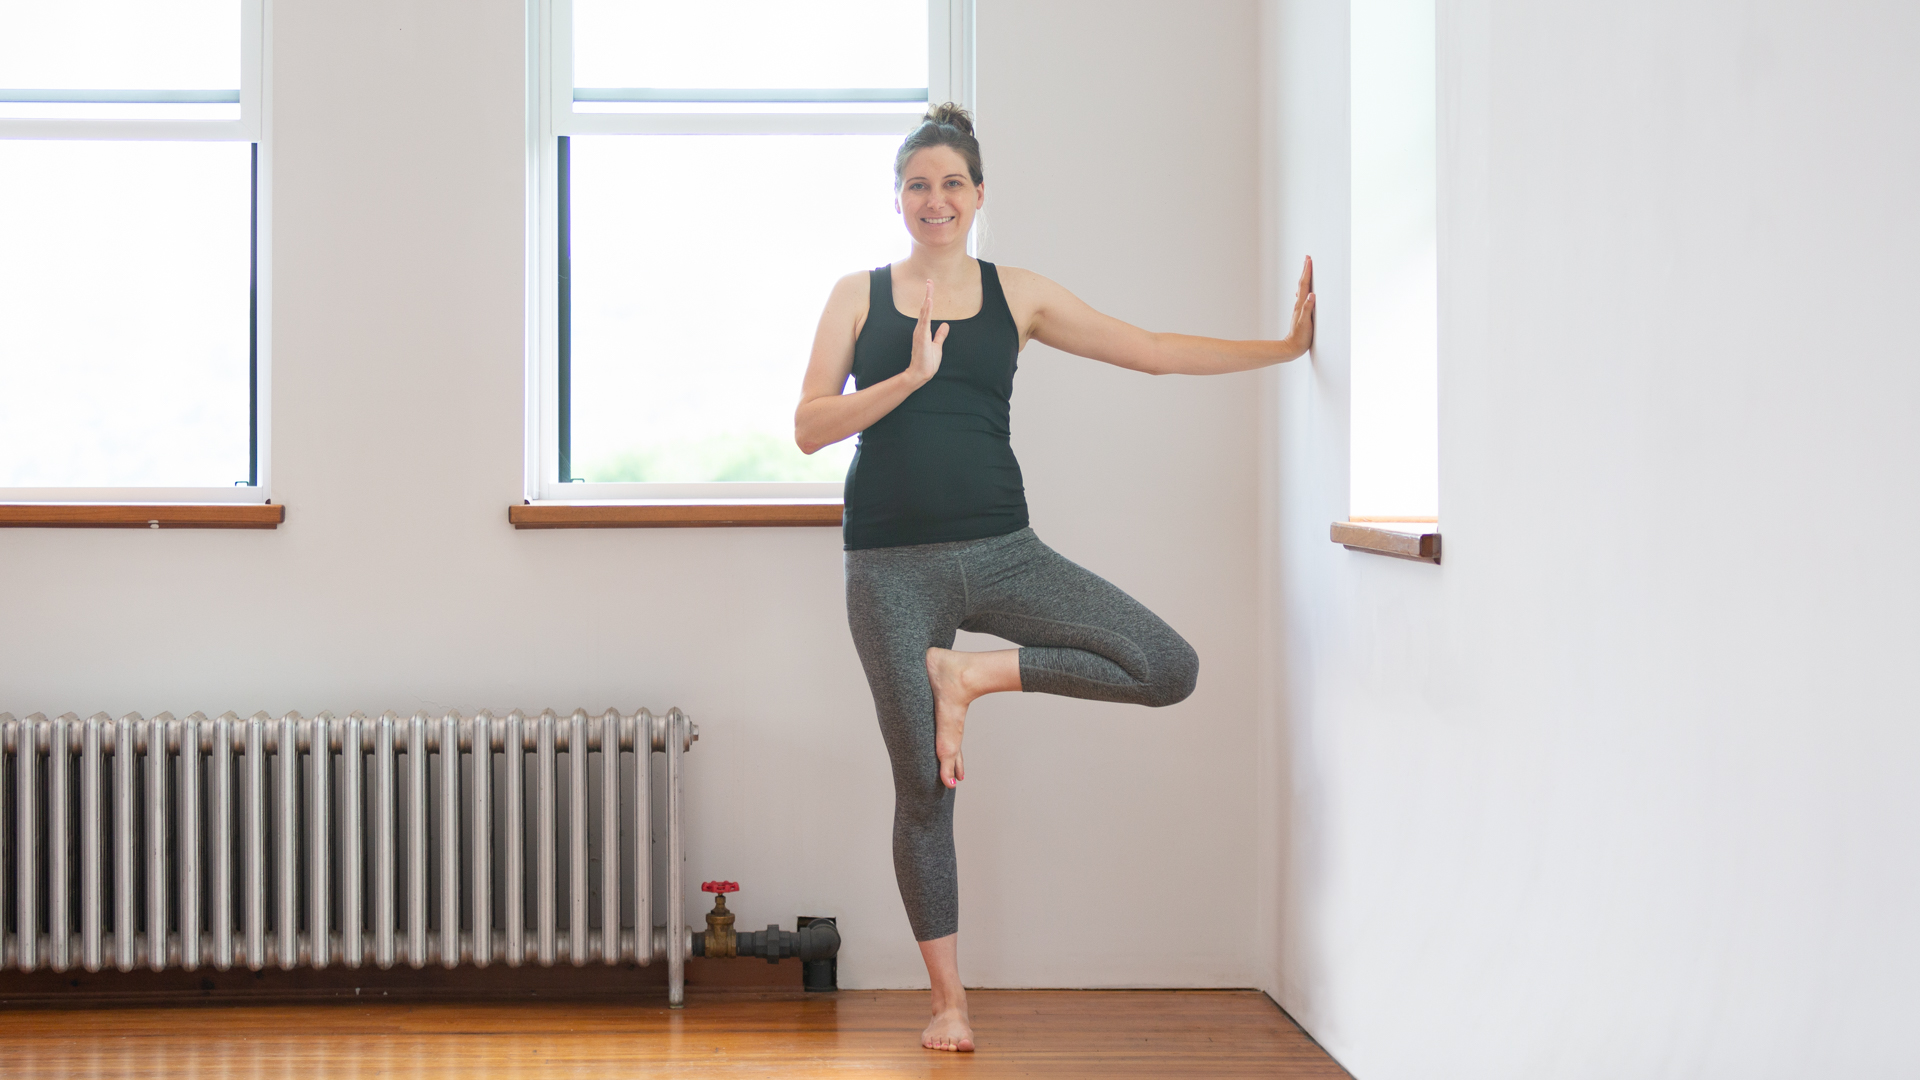 Second Trimester Yoga: 5 Do's and 5 Don'ts | YouAligned.com